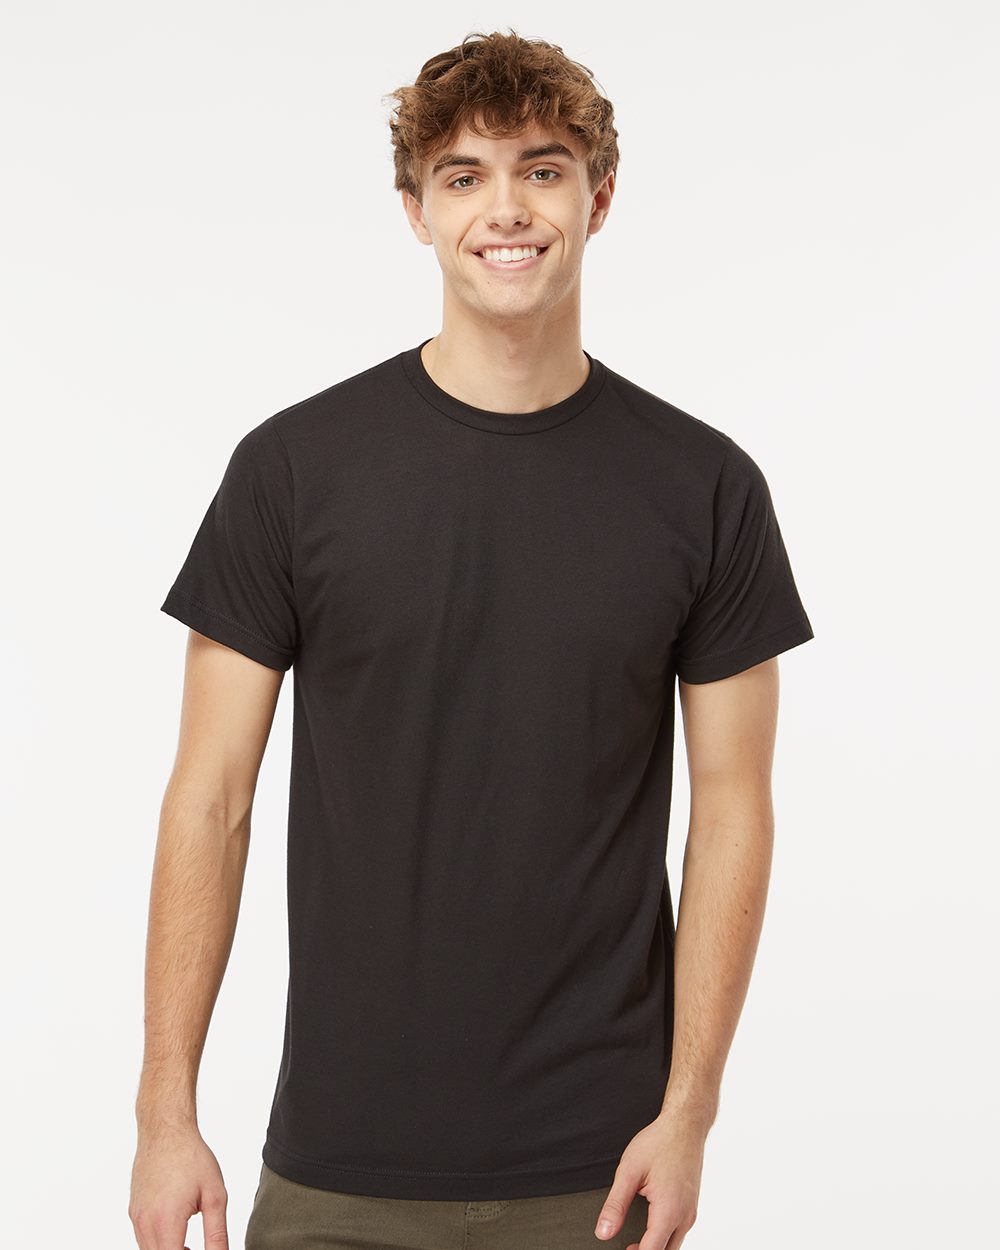 M&O 3541 - Deluxe Blend T-Shirt